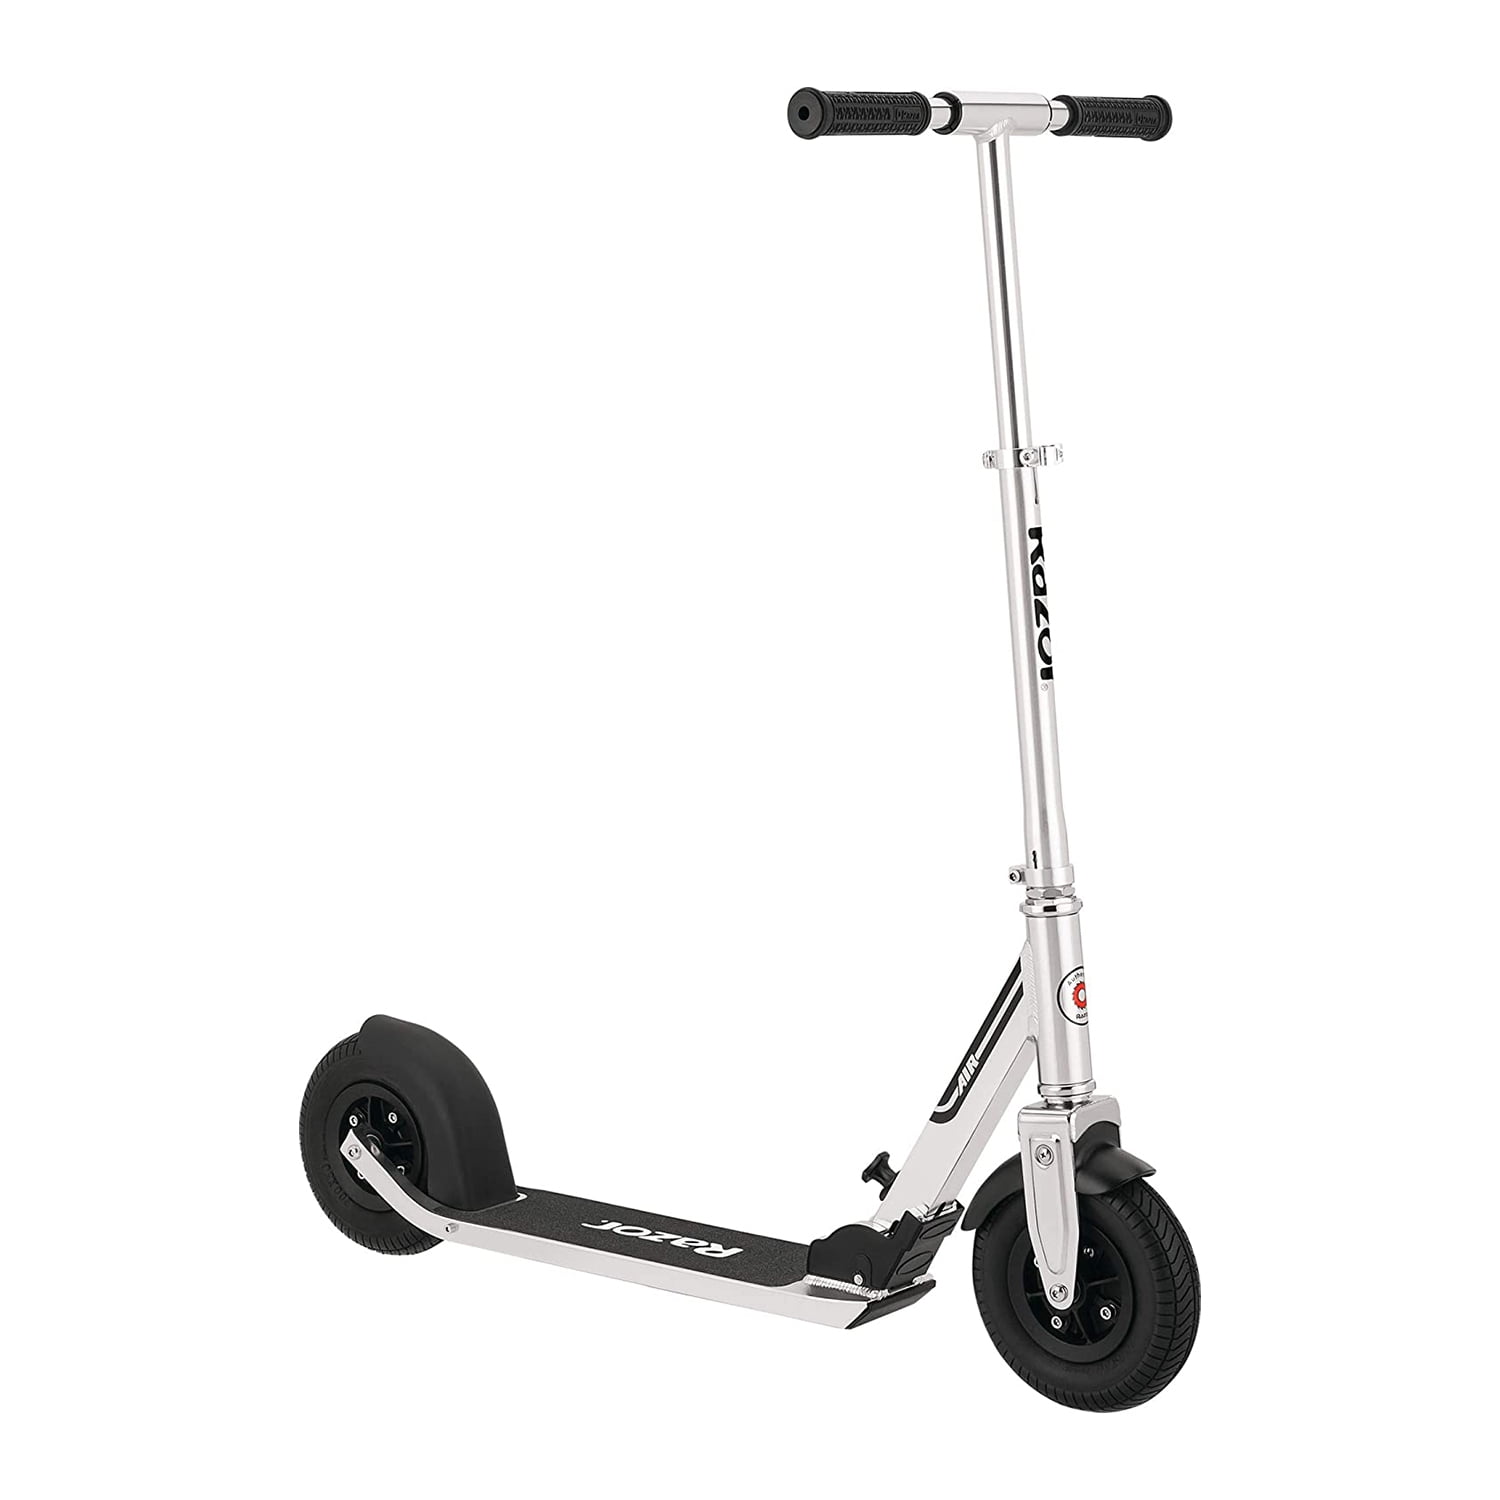 Genuine Replacement Parts for Razor A5 Air Scooter A5 Air Wheel